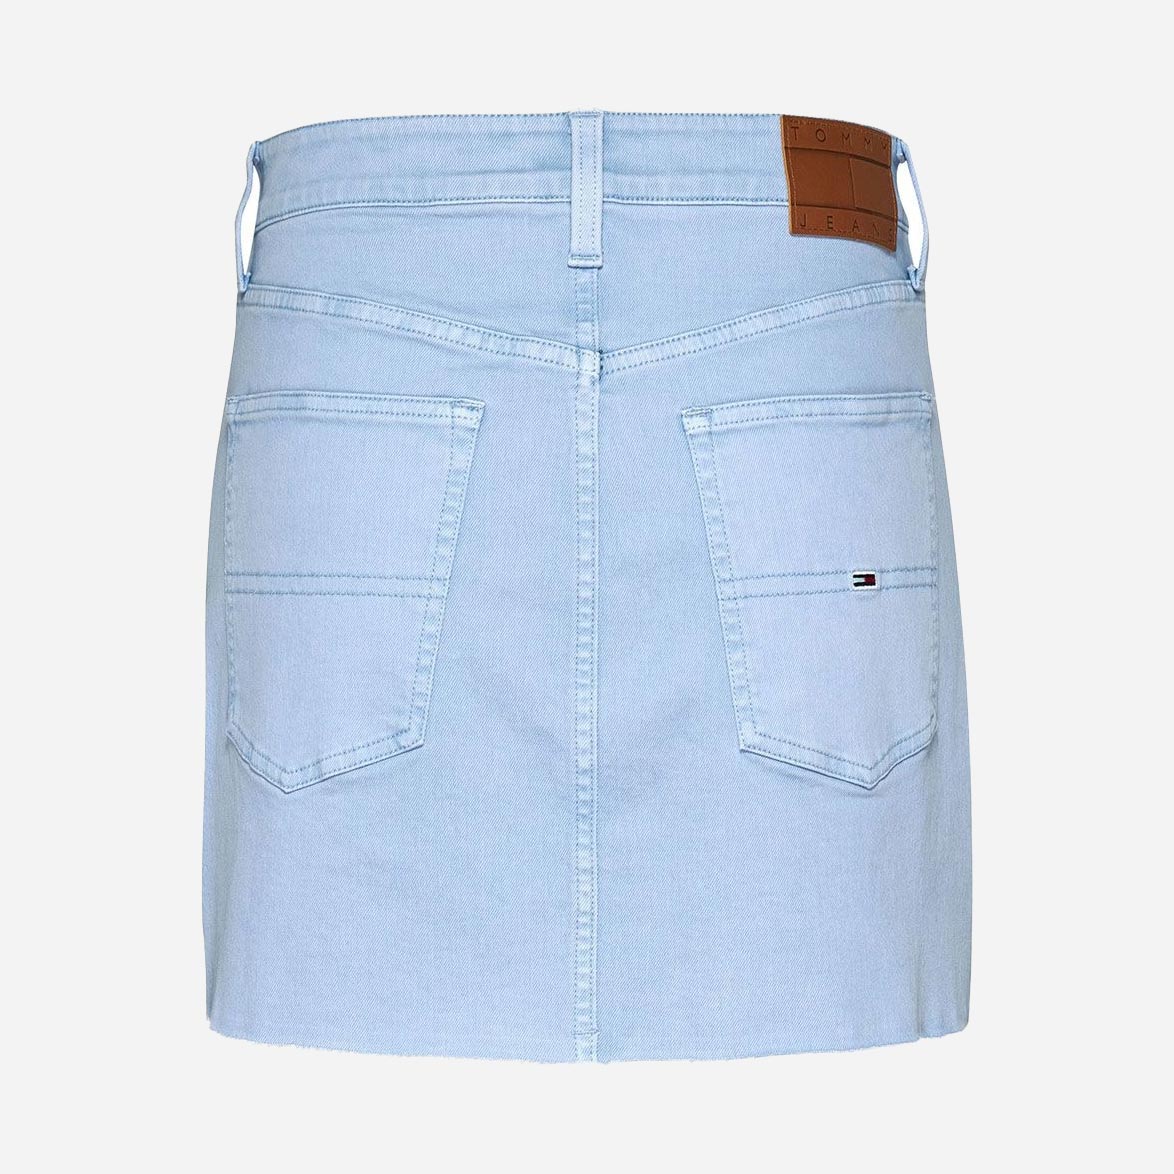 Tommy Jeans Womens Izzie Regular Fit Skirt - Moderate Blue